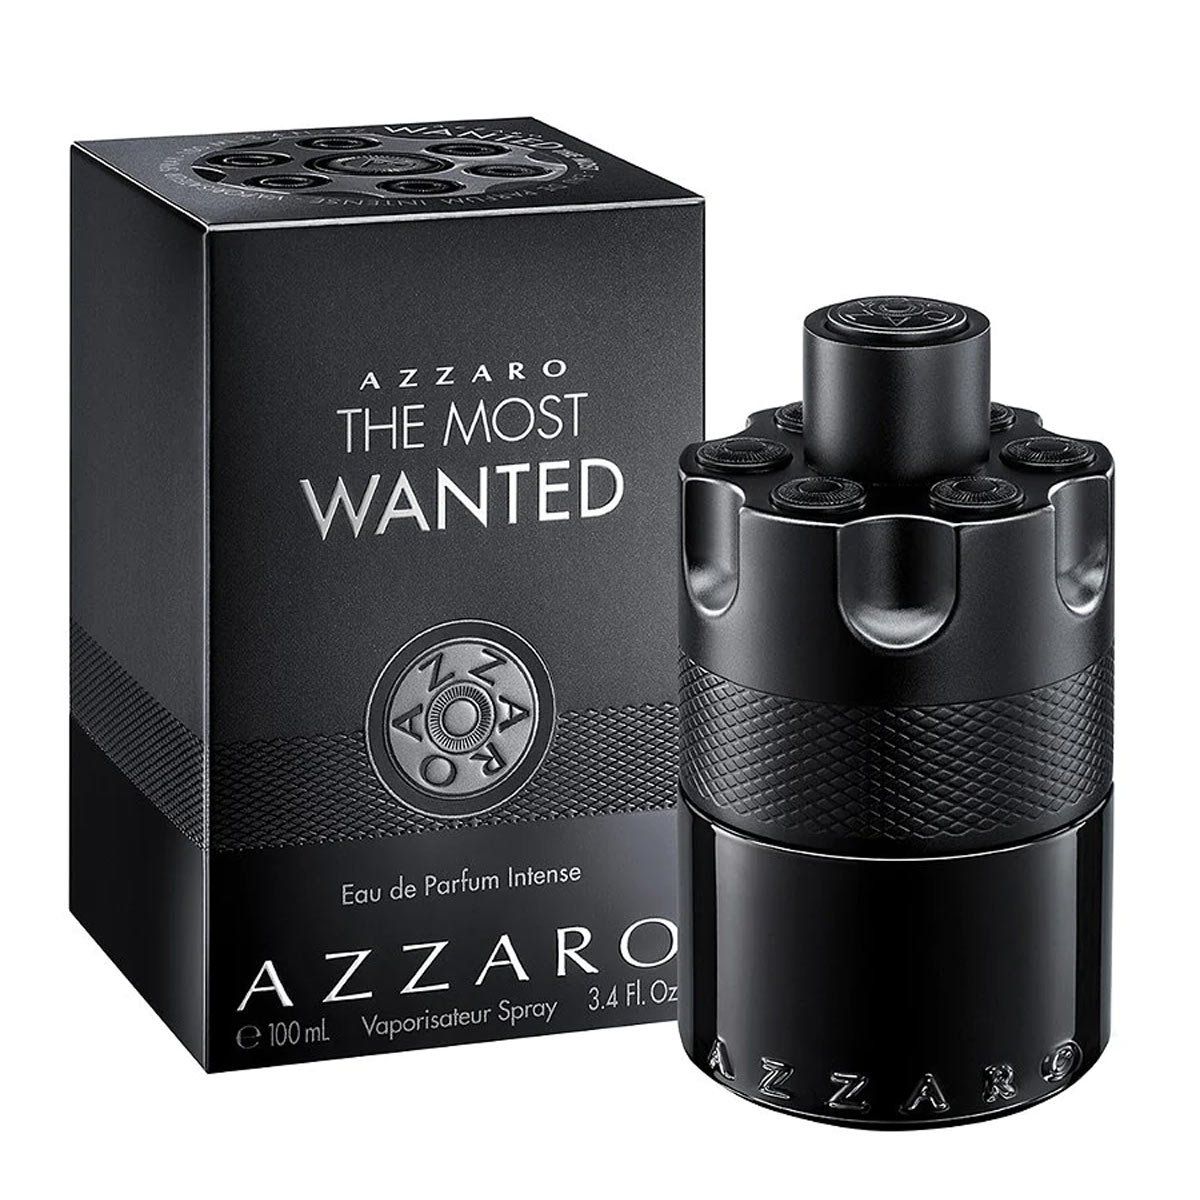  Azzaro The Most Wanted 